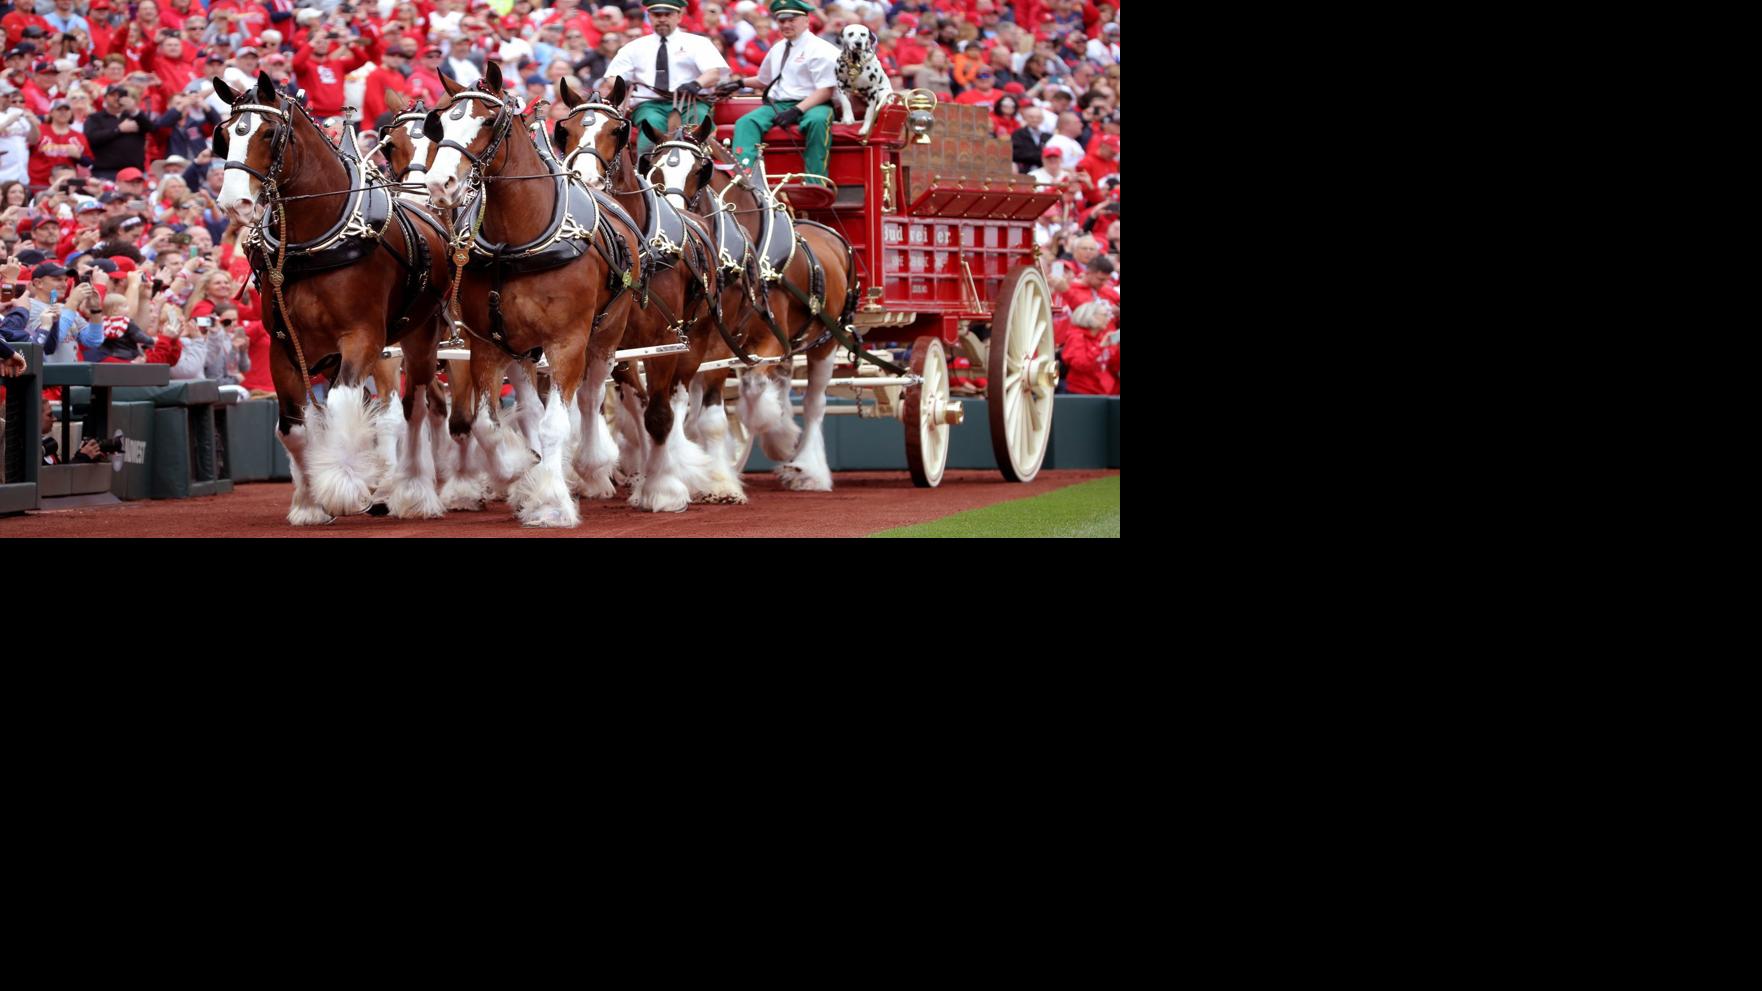 Scenes from 2019 Cardinals opening day | St. Louis Cardinals | wcy.wat.edu.pl